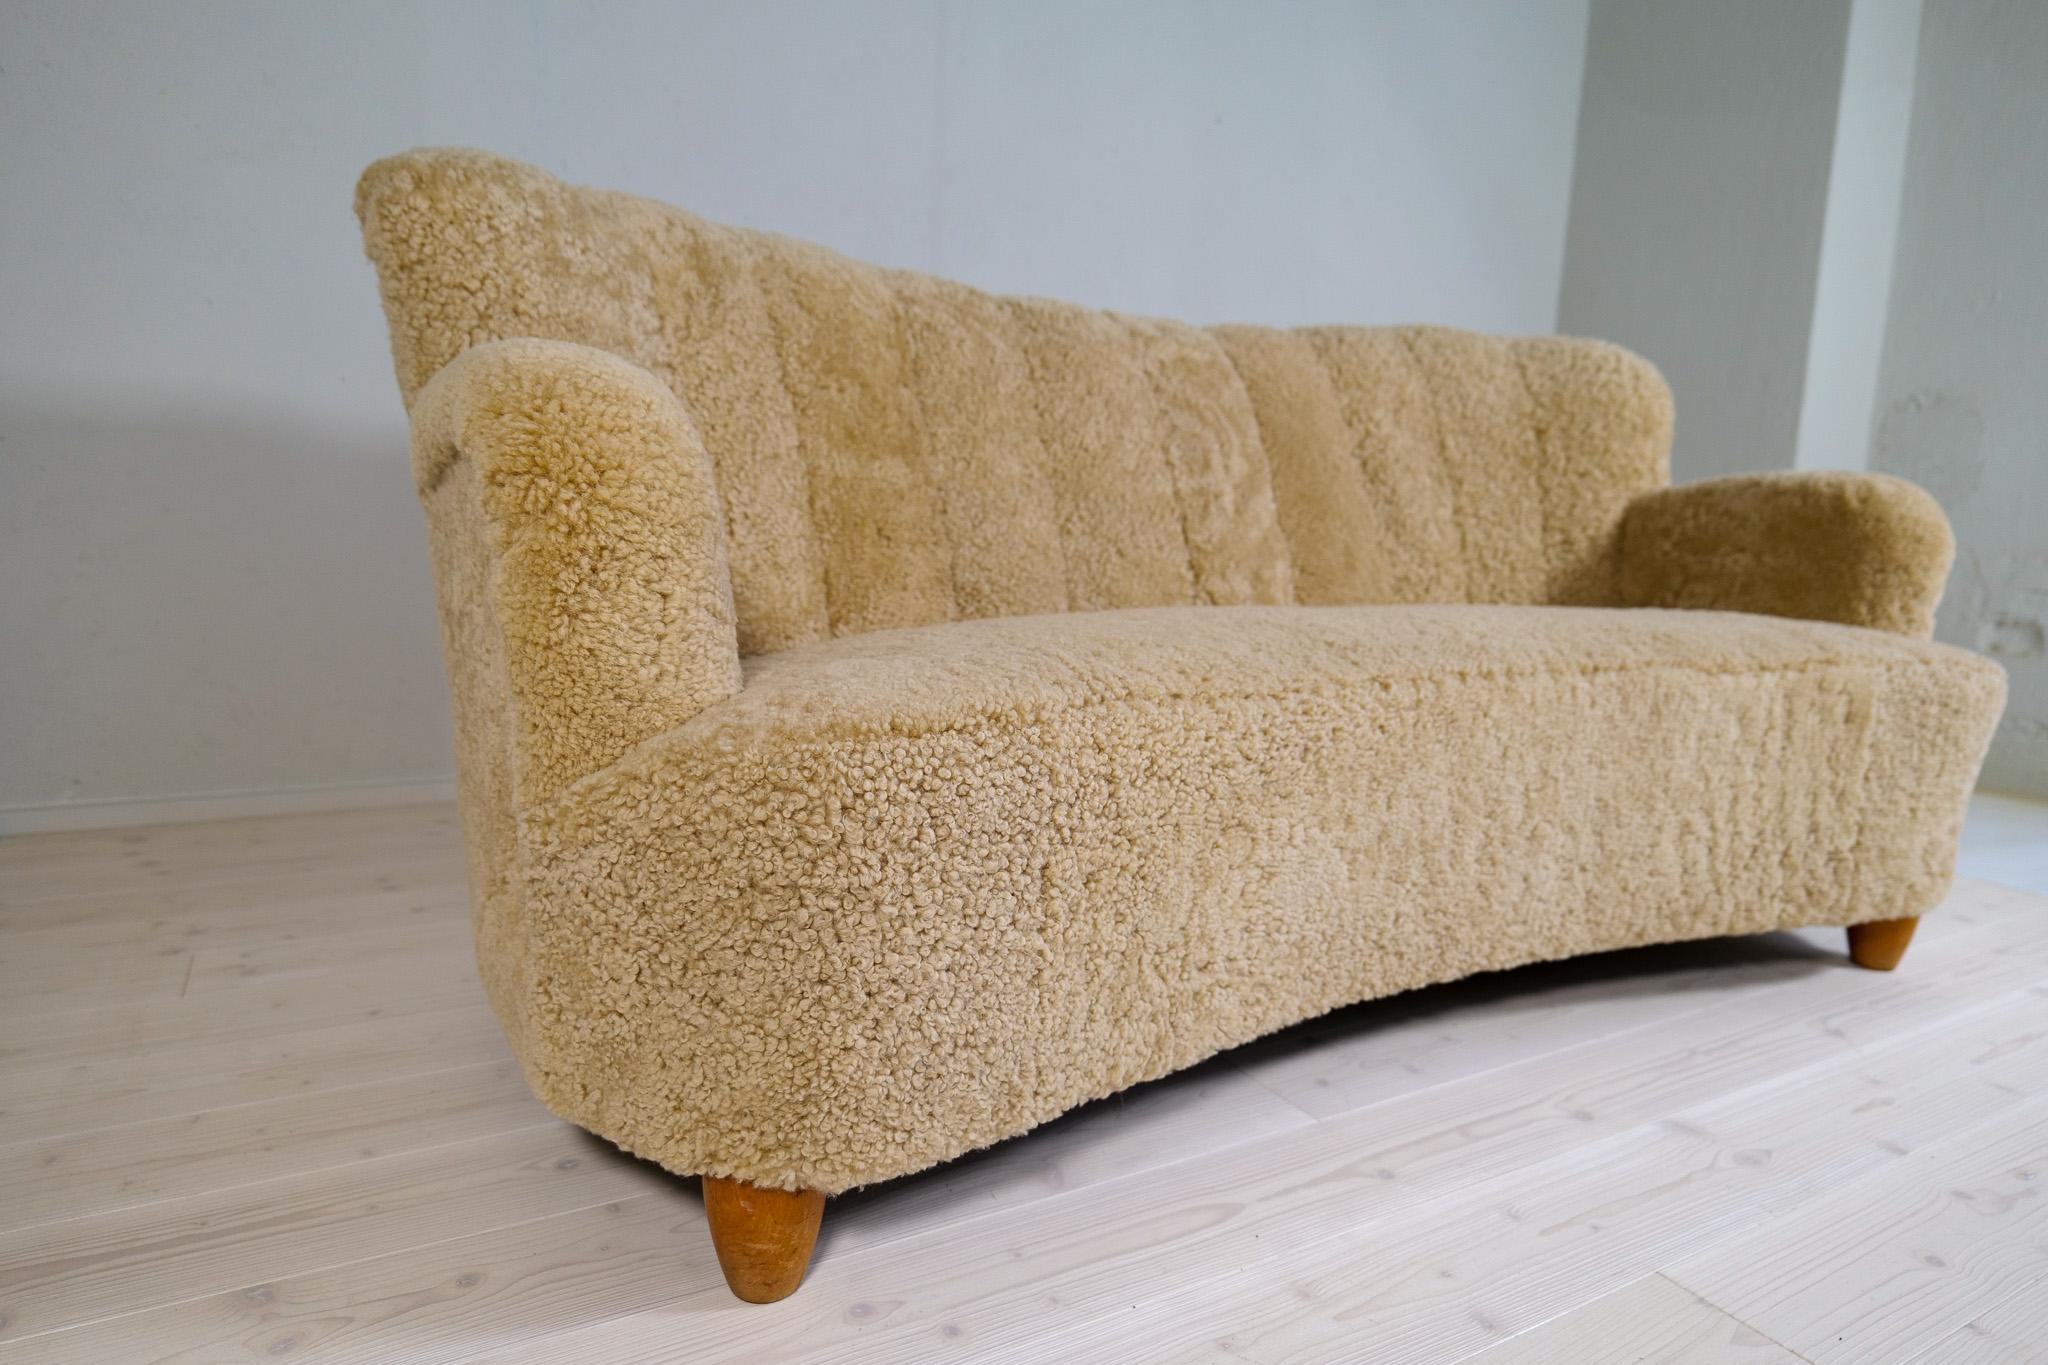 Midcentury Sculptrual Sheepskin/Shearling Sofa in Manors of Marta Blomstedt 2